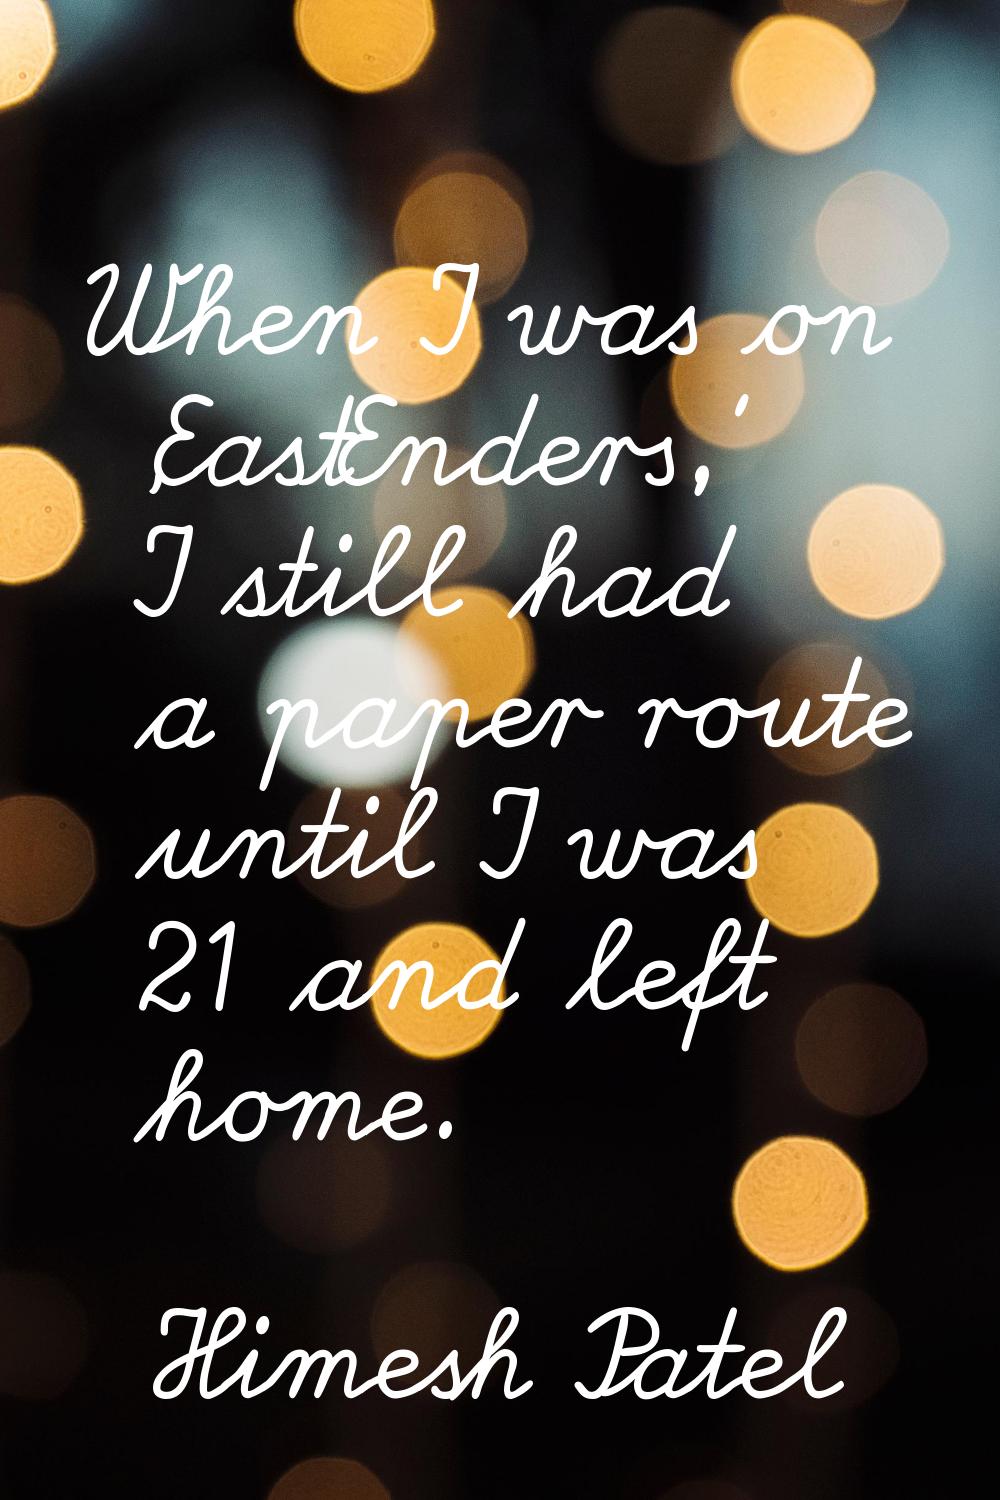 When I was on 'EastEnders,' I still had a paper route until I was 21 and left home.